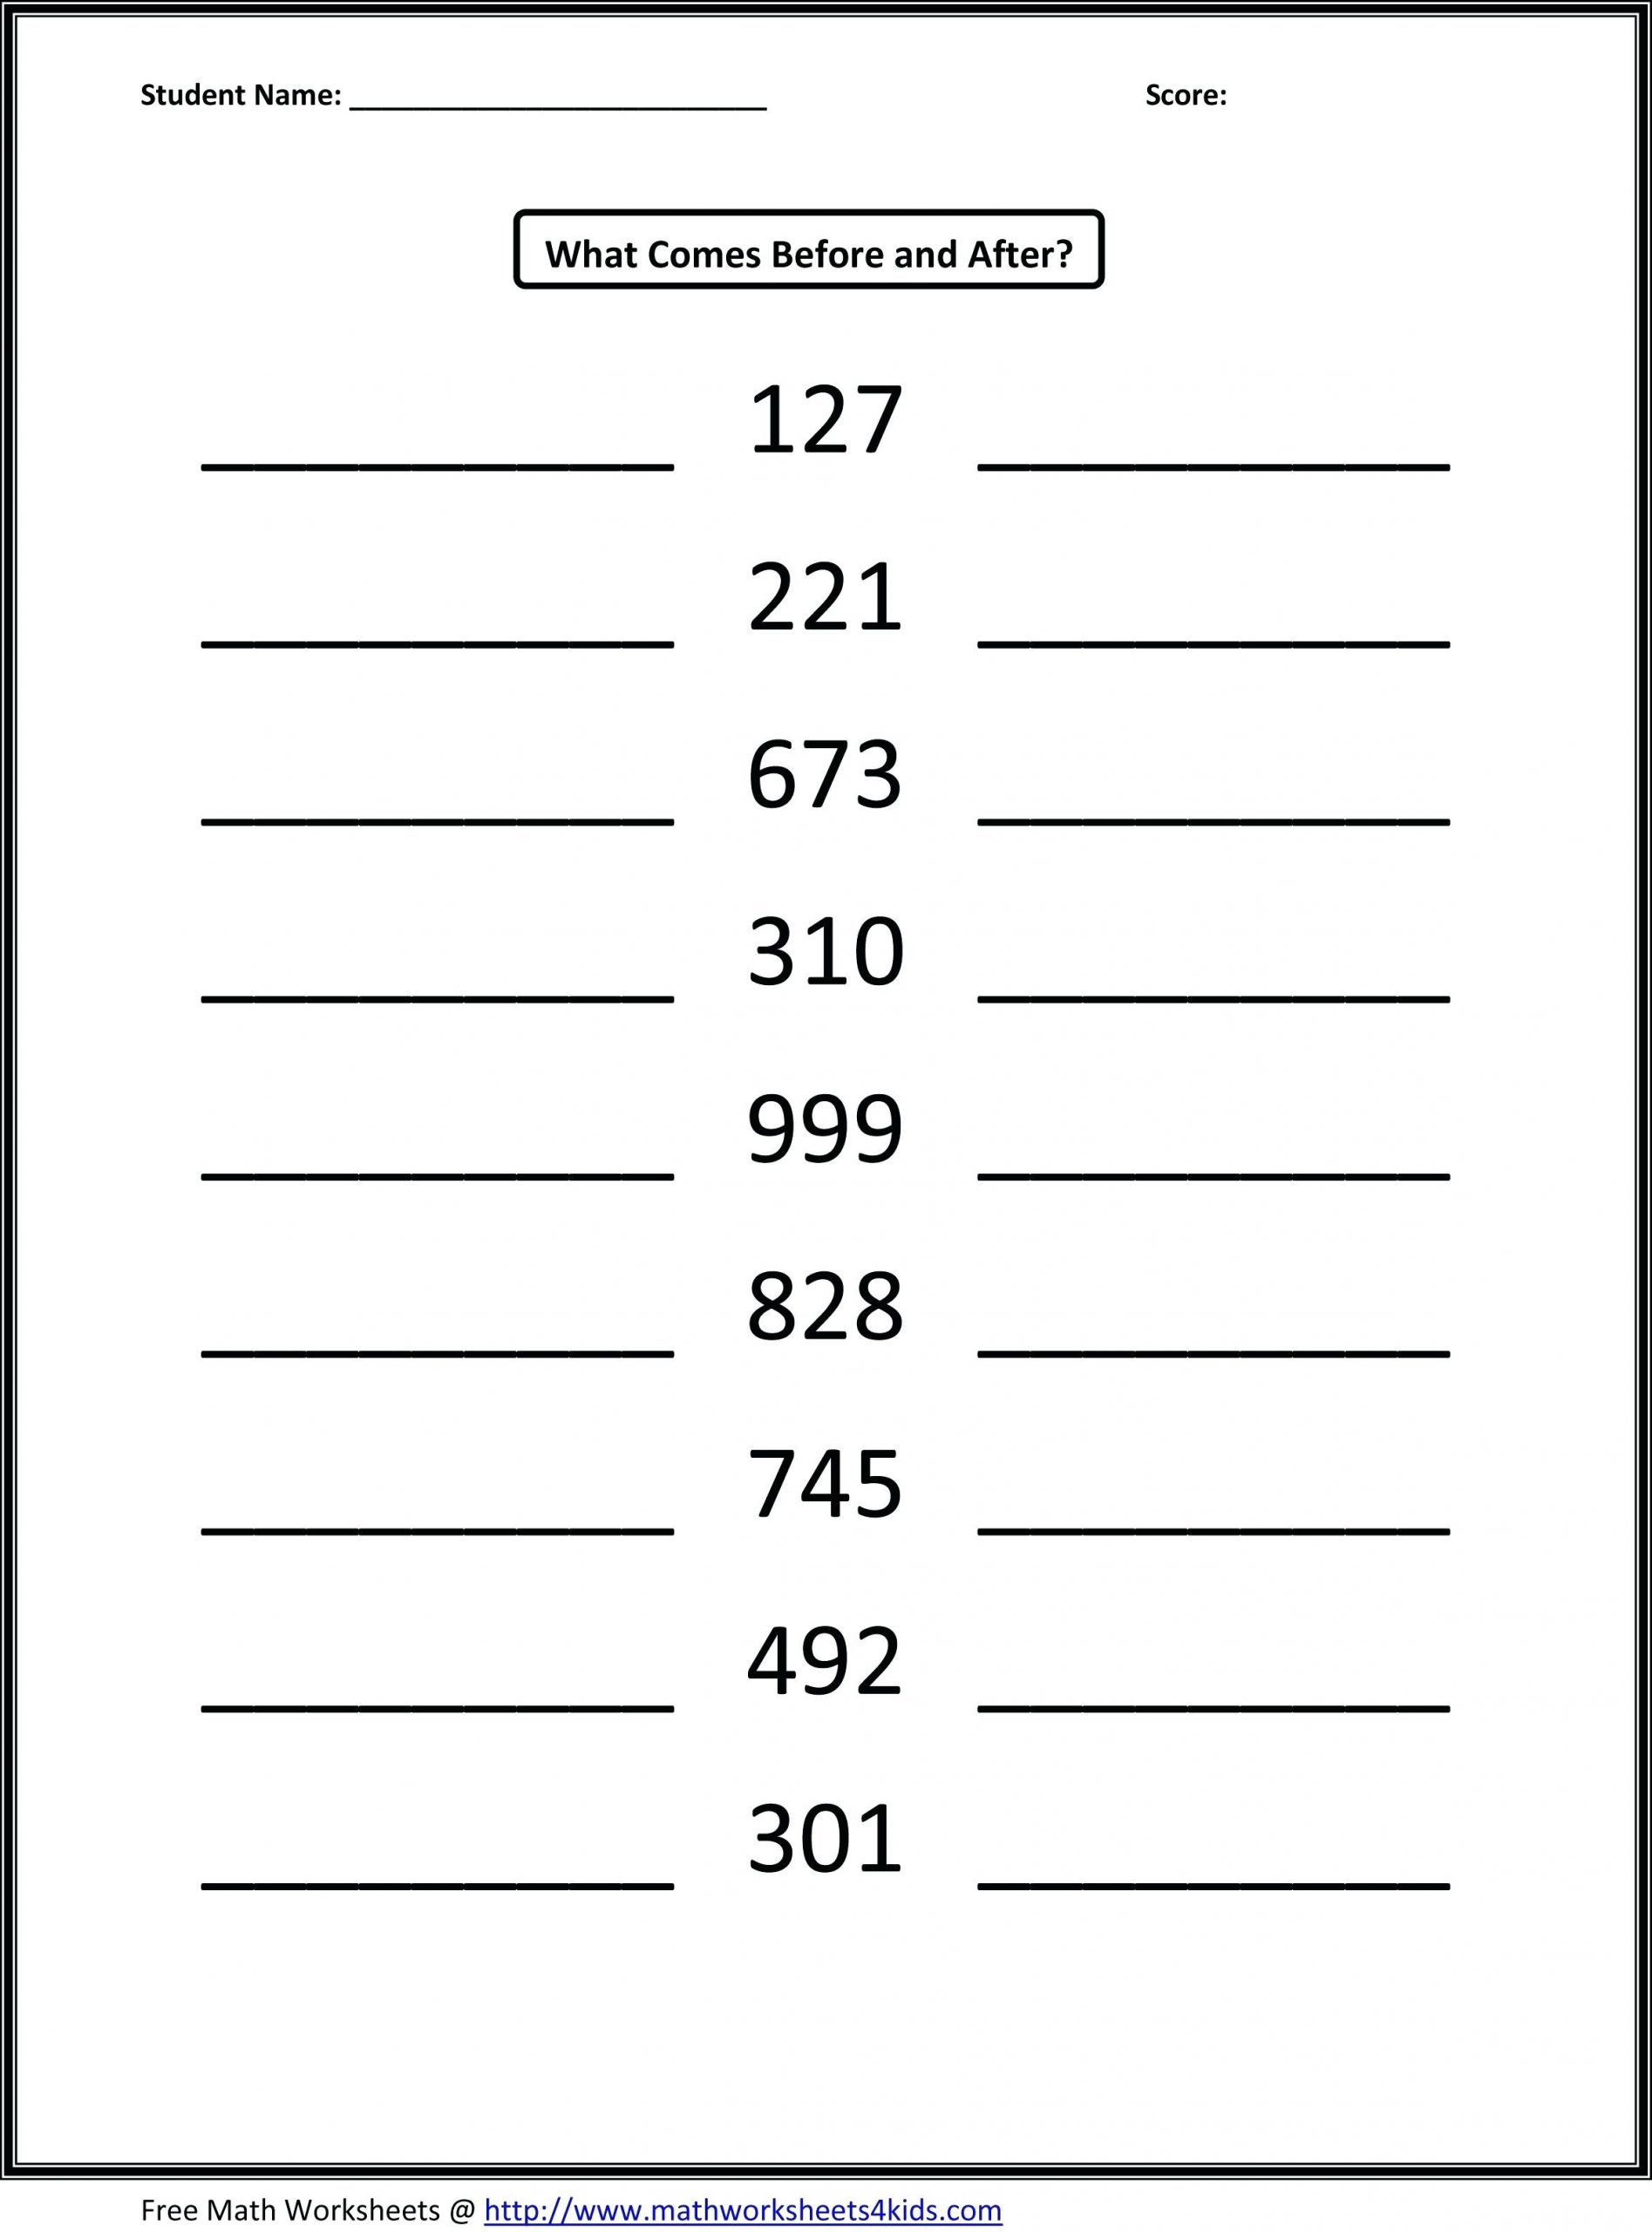 Free Math Worksheets Second Grade 2 Addition Add 4 Single Digit Numbers